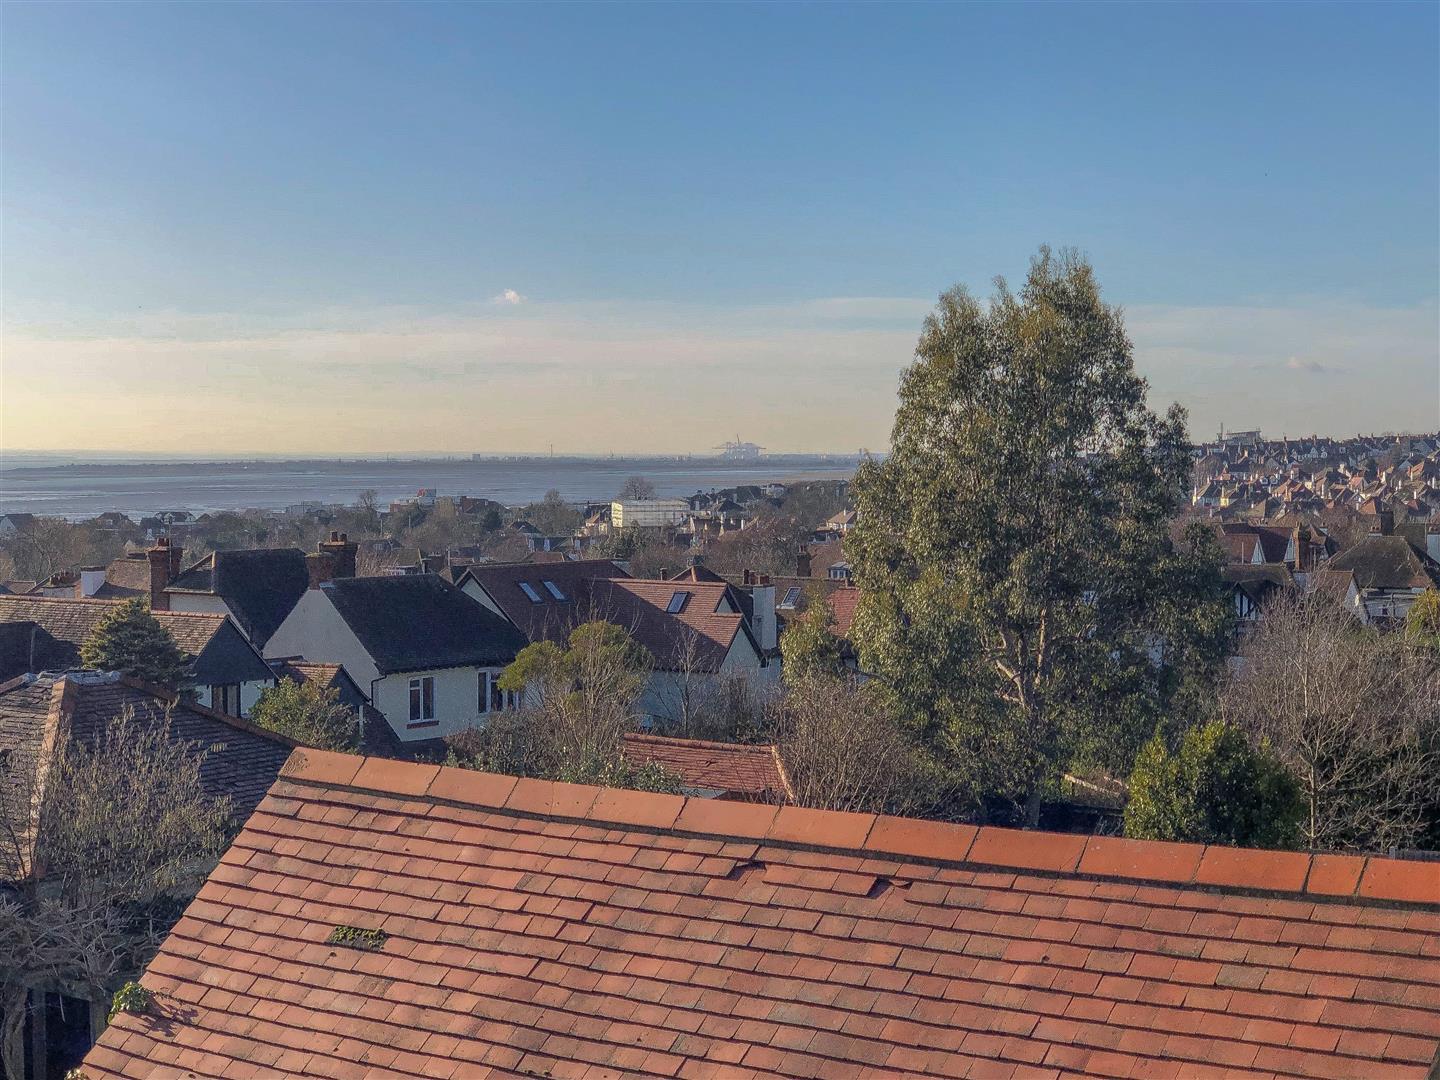 Stunning views - the property is a stones throw from the Thames Estuary